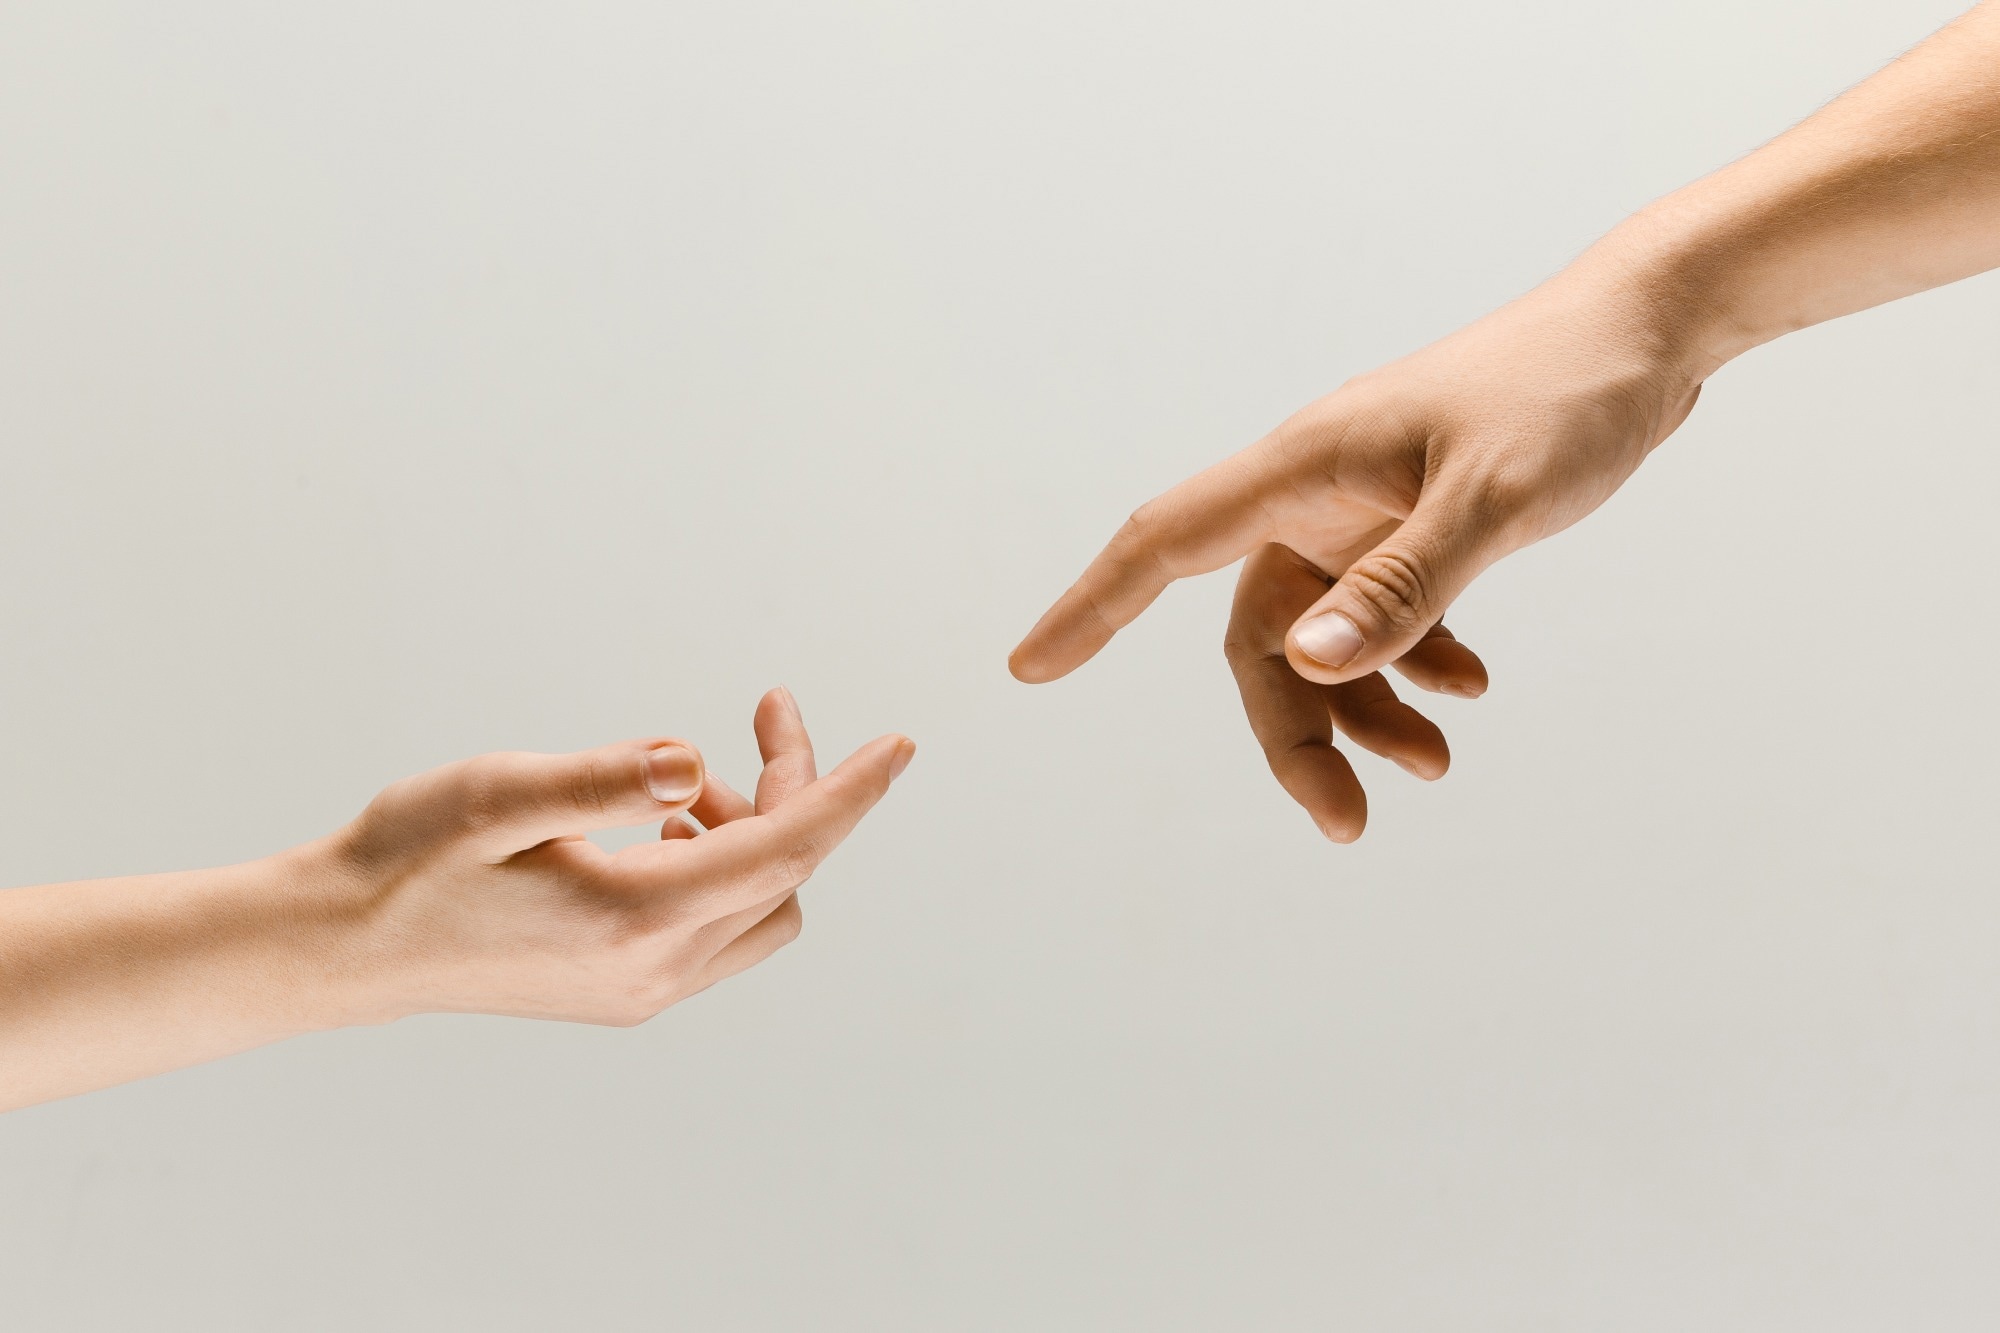 Study: Touch neurons underlying dopaminergic pleasurable touch and sexual receptivity. Image Credit: Master1305/Shutterstock